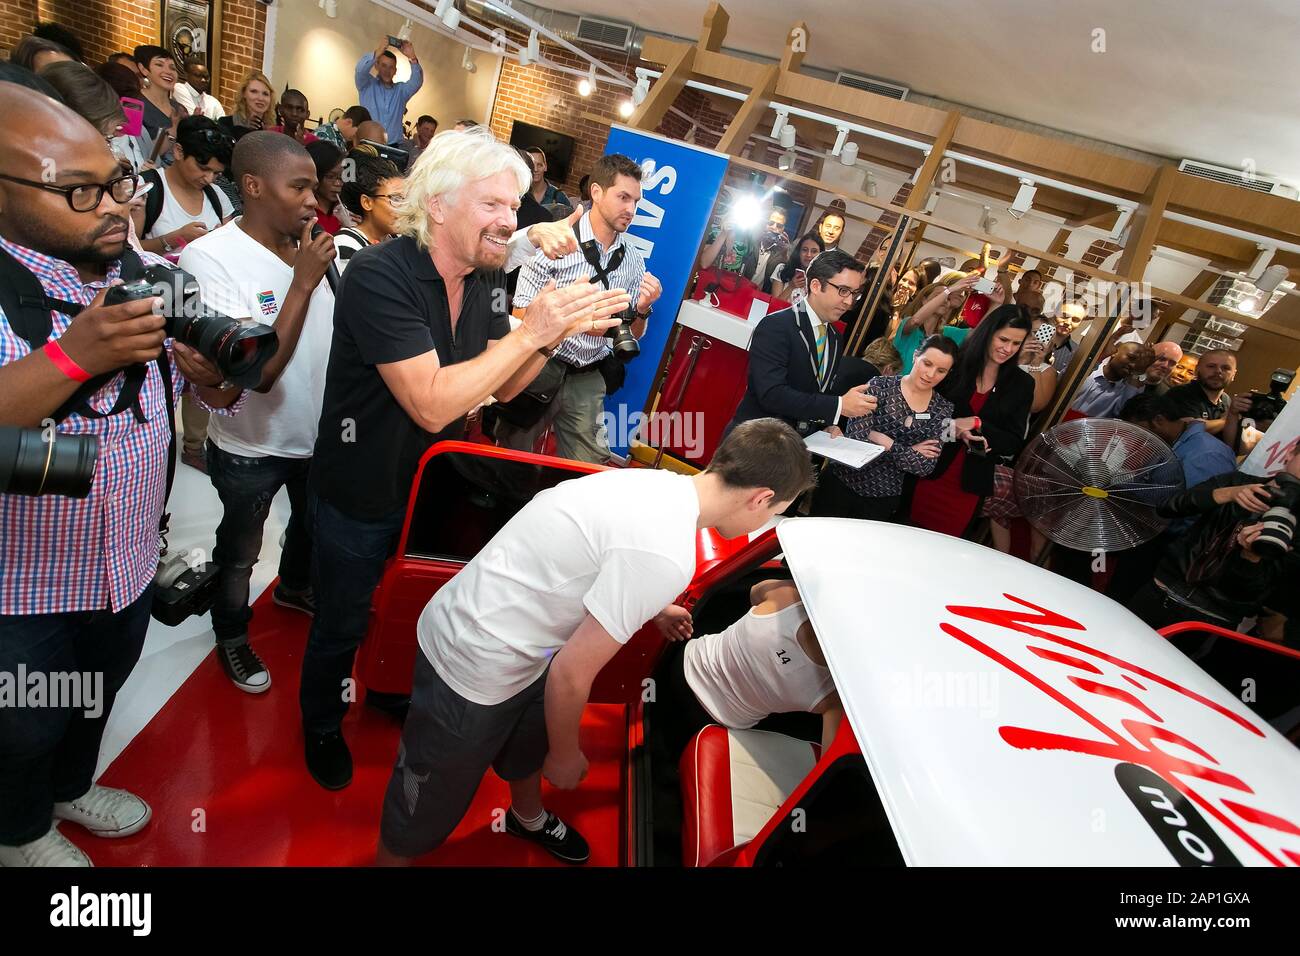 Johannesburg, South Africa - October 02, 2013: Richard Branson at Virgin Mobile Guinness World Record attempt and achieved fitting 25 people into a re Stock Photo